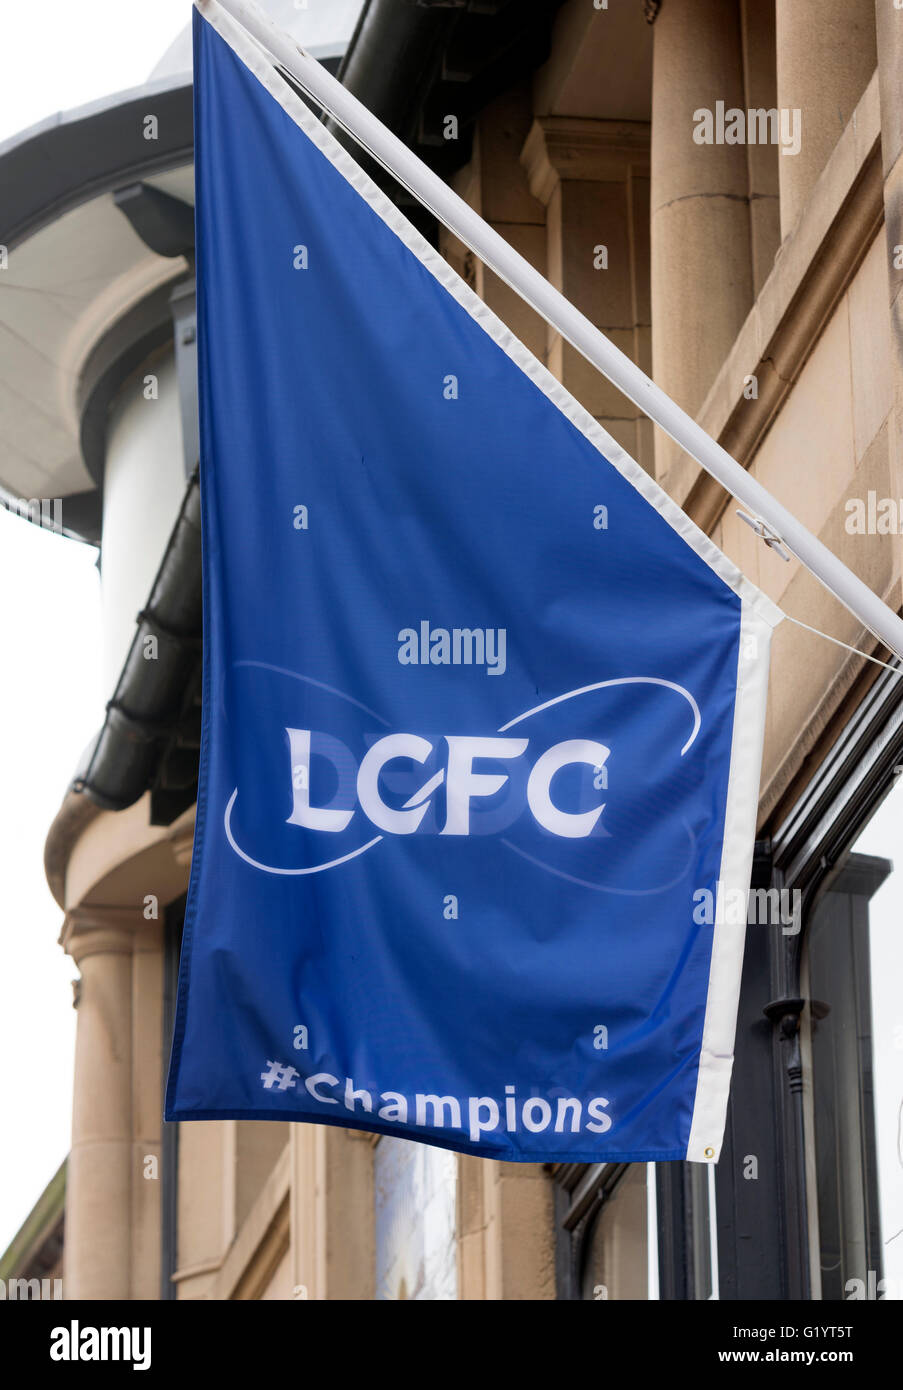 Leicester City Football Club champions flag, Leicester ccity centre, UK Stock Photo